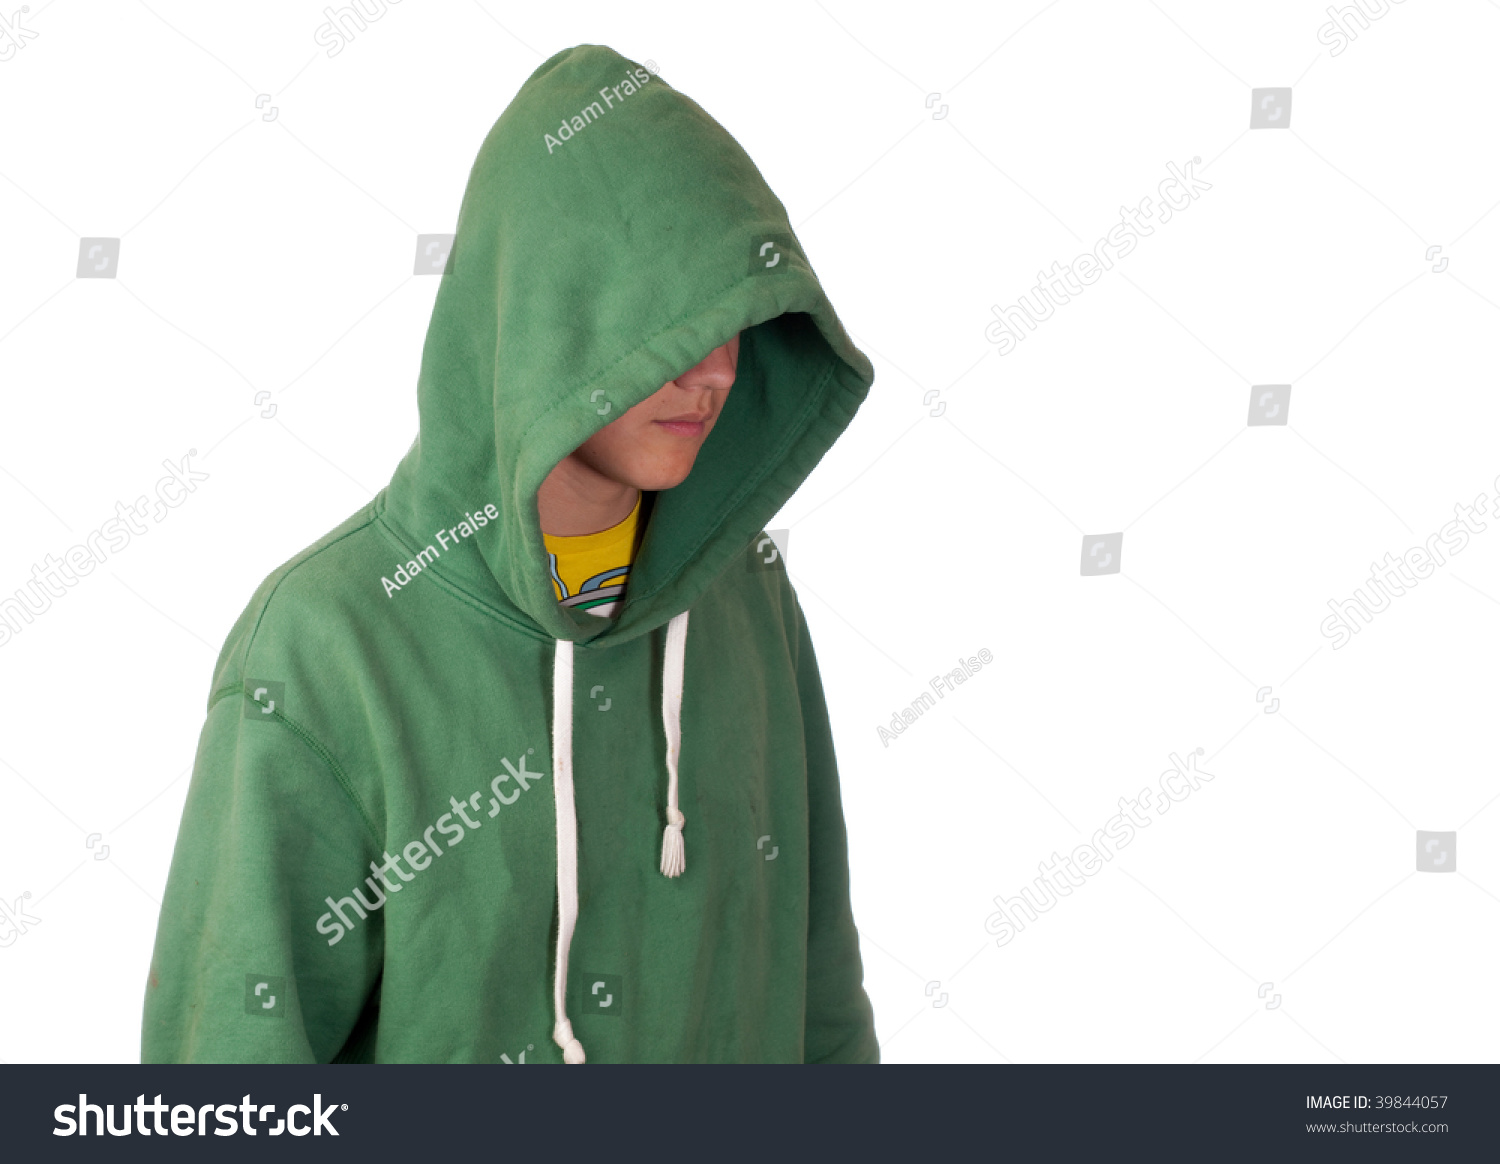 stock-photo-a-young-man-in-a-hoodie-with-face-hidden-39844057.jpg